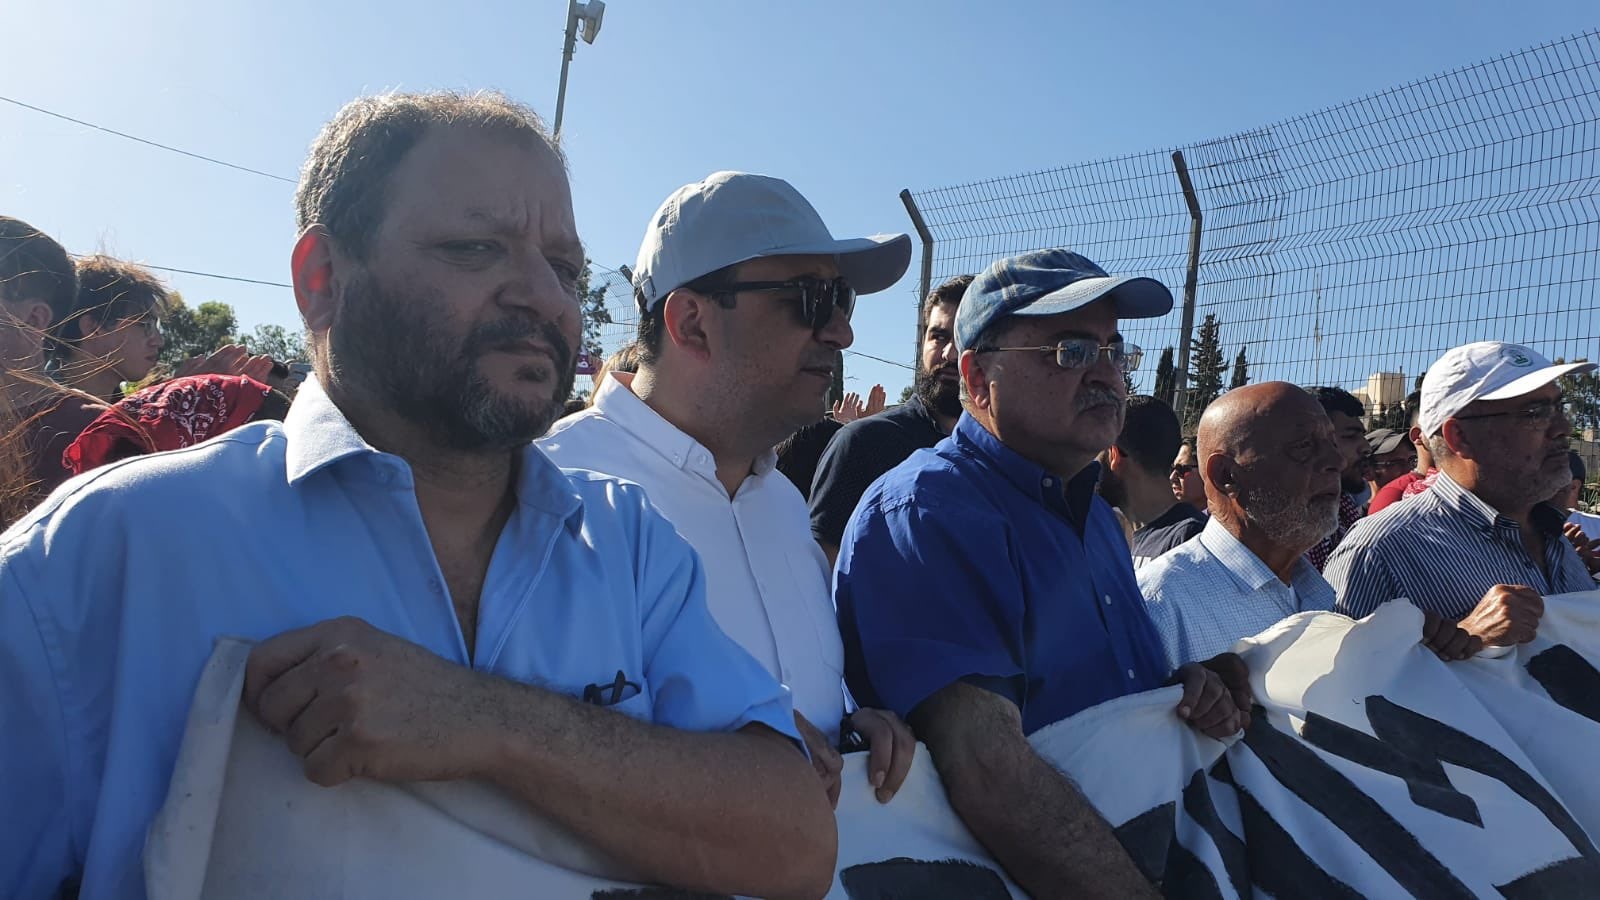 Three Joint List lawmakers participate in the Friday, May 7, demonstration in the Palestinian neighborhood of Sheikh Jarrah in occupied East Jerusalem. First from left to right they are MK Ofer Cassif (Hadash), Samy Abu Shahadeh (Balad) and Ahmad Tibi (Ta'al).